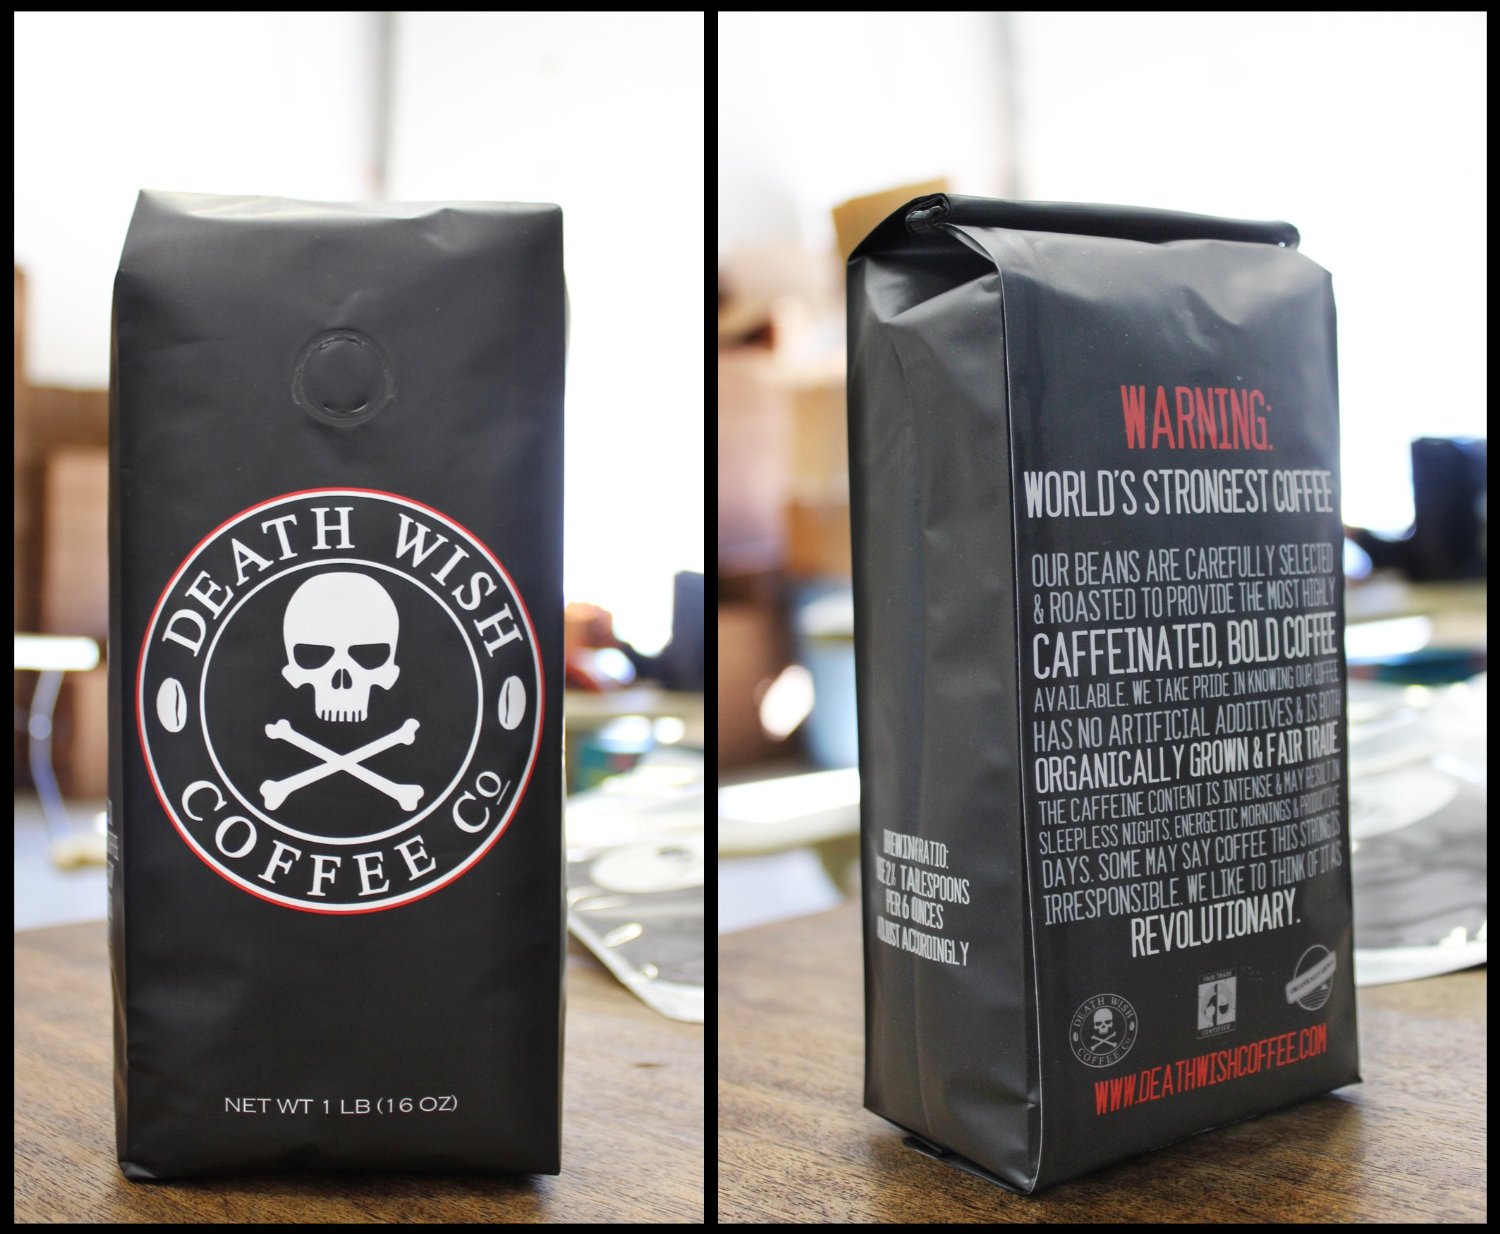 Death Wish Coffee (crazy strong coffee) - $20